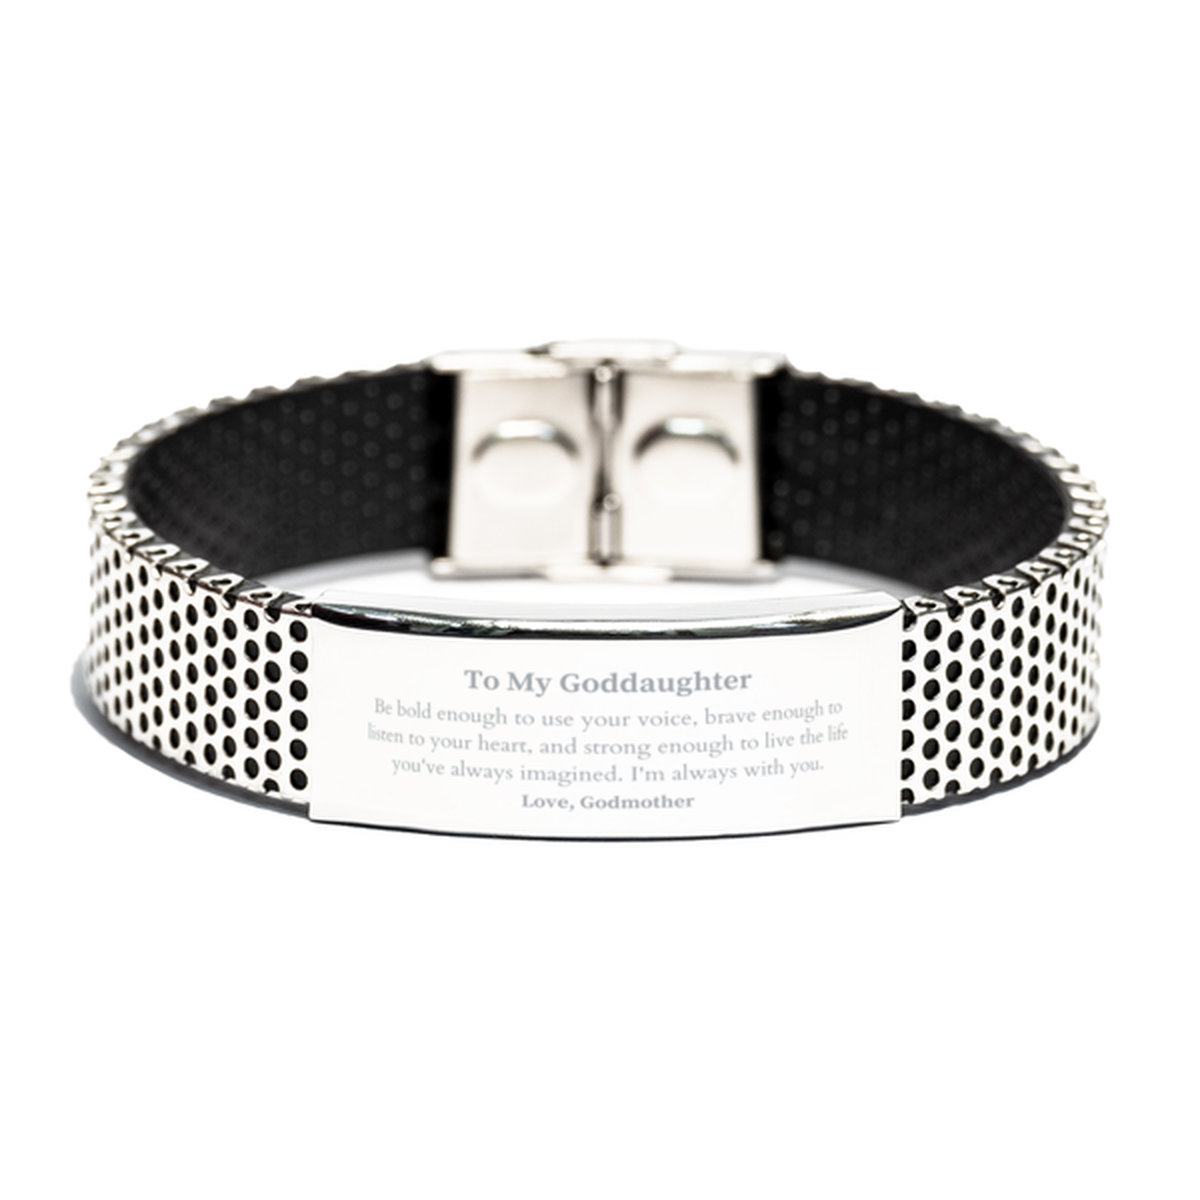 Keepsake Goddaughter Stainless Steel Bracelet Gift Idea Graduation Christmas Birthday Goddaughter from Godmother, Goddaughter Be bold enough to use your voice, brave enough to listen to your heart. Love, Godmother